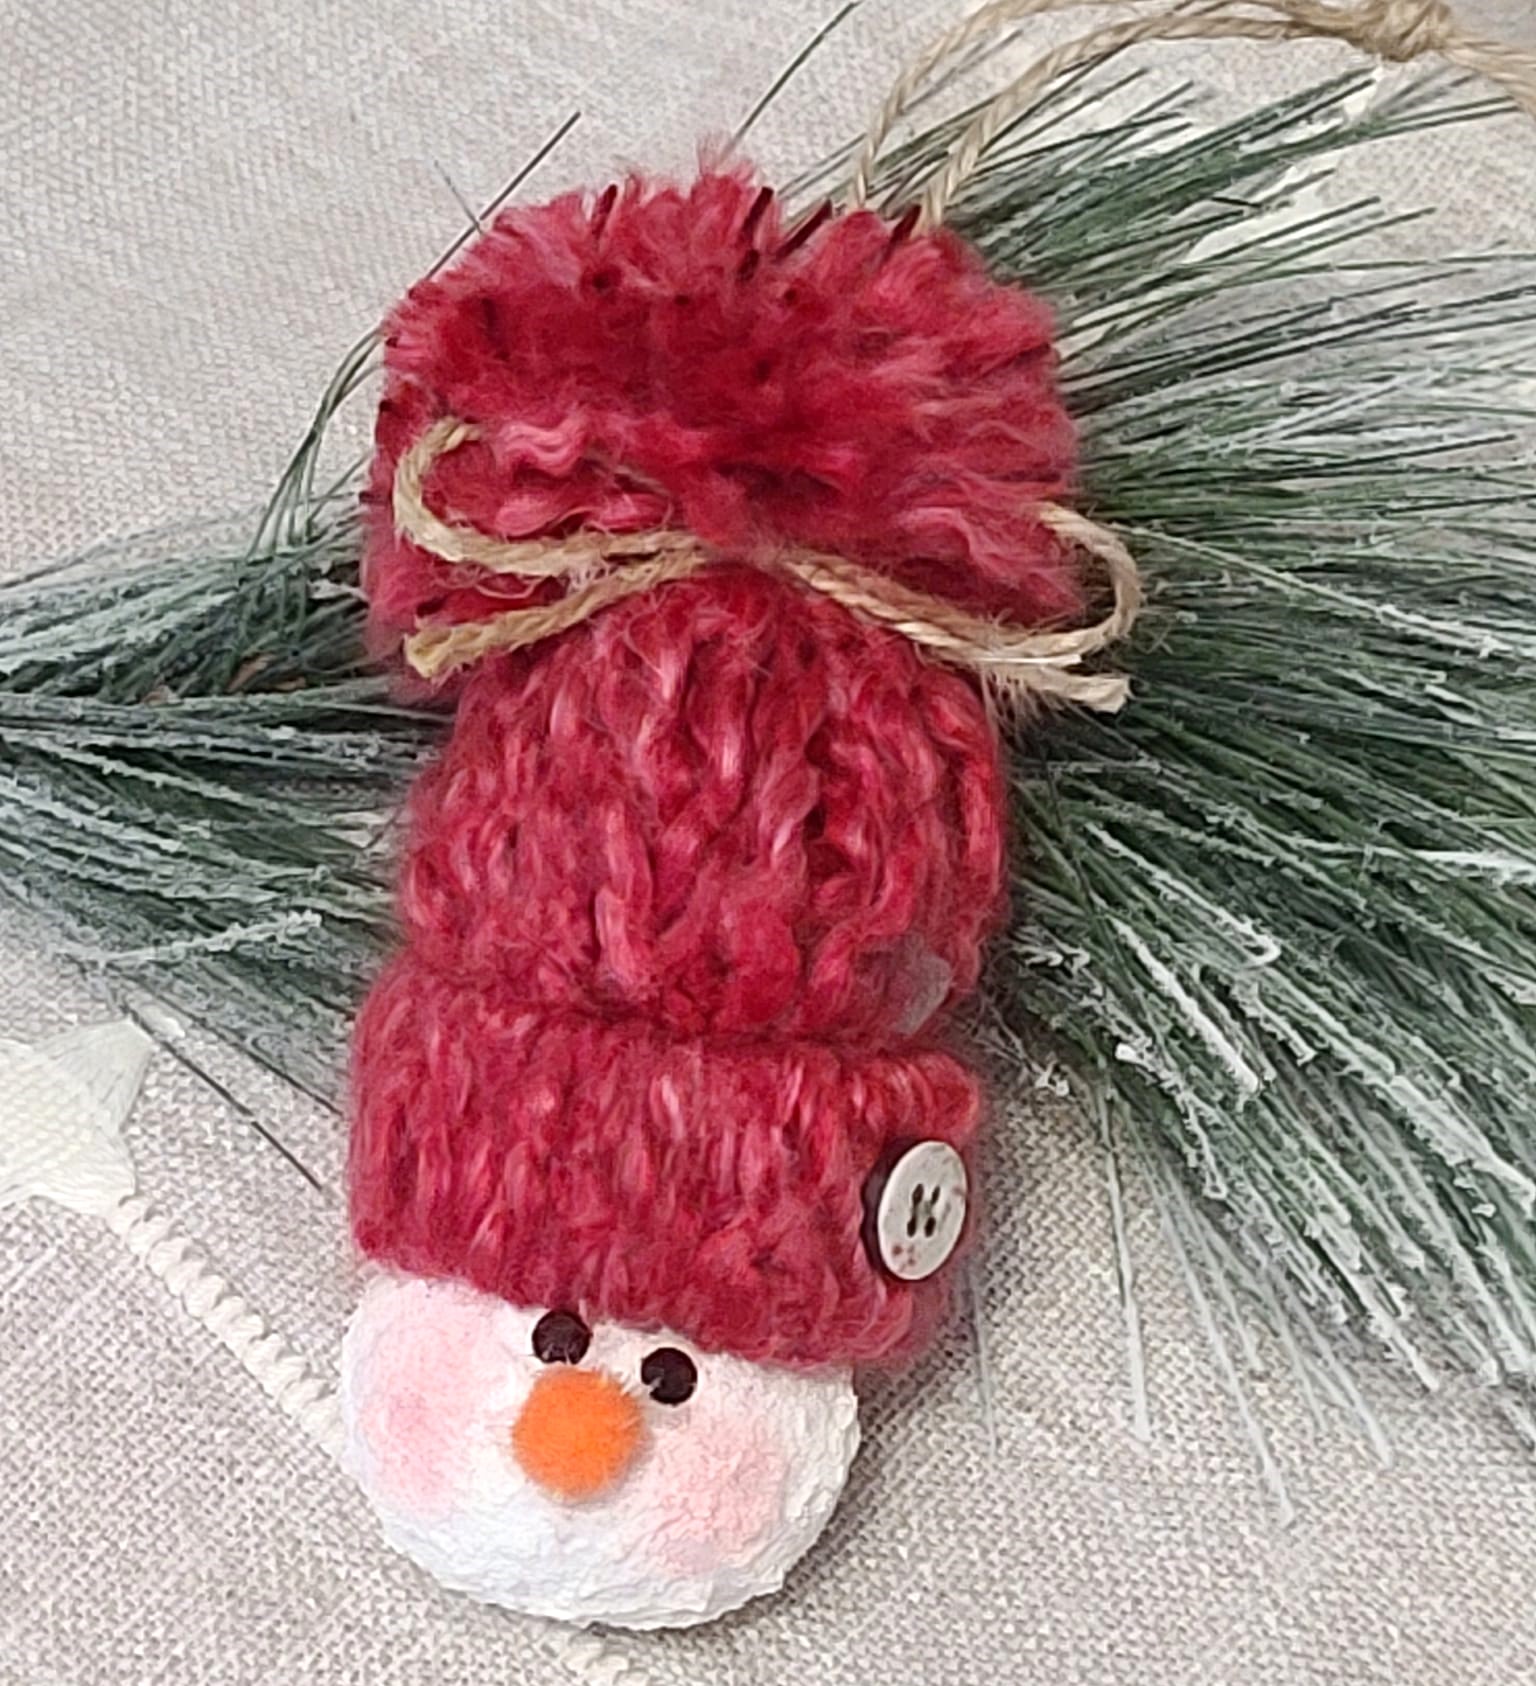 Handpainted gourd snowman ornament with knit hat - rose color